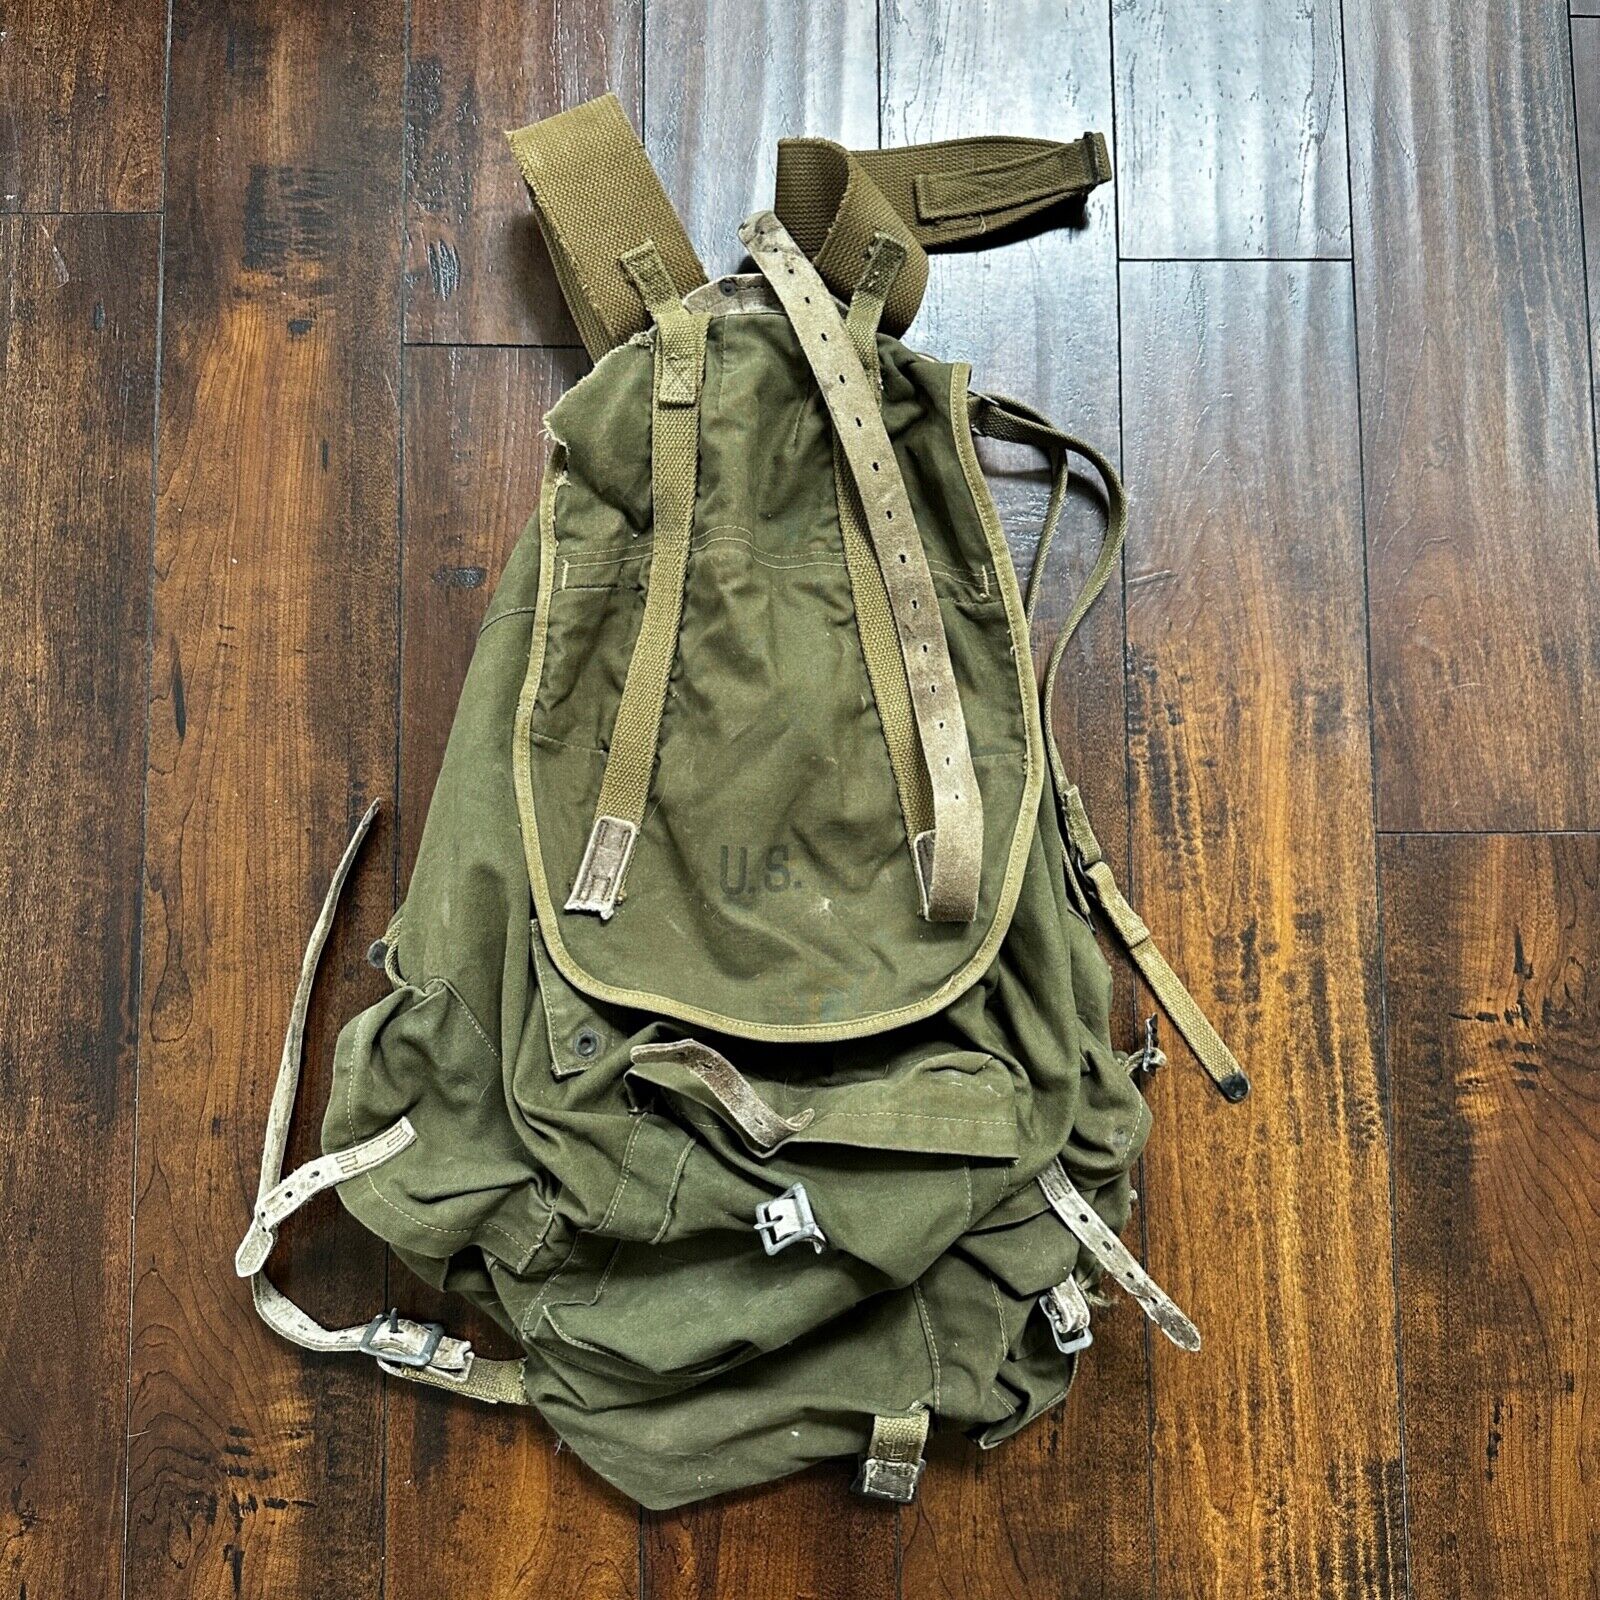 VTG WWII US Army JQD 88B Mountain Div Rucksack Backpack WW2 AVERY 1943